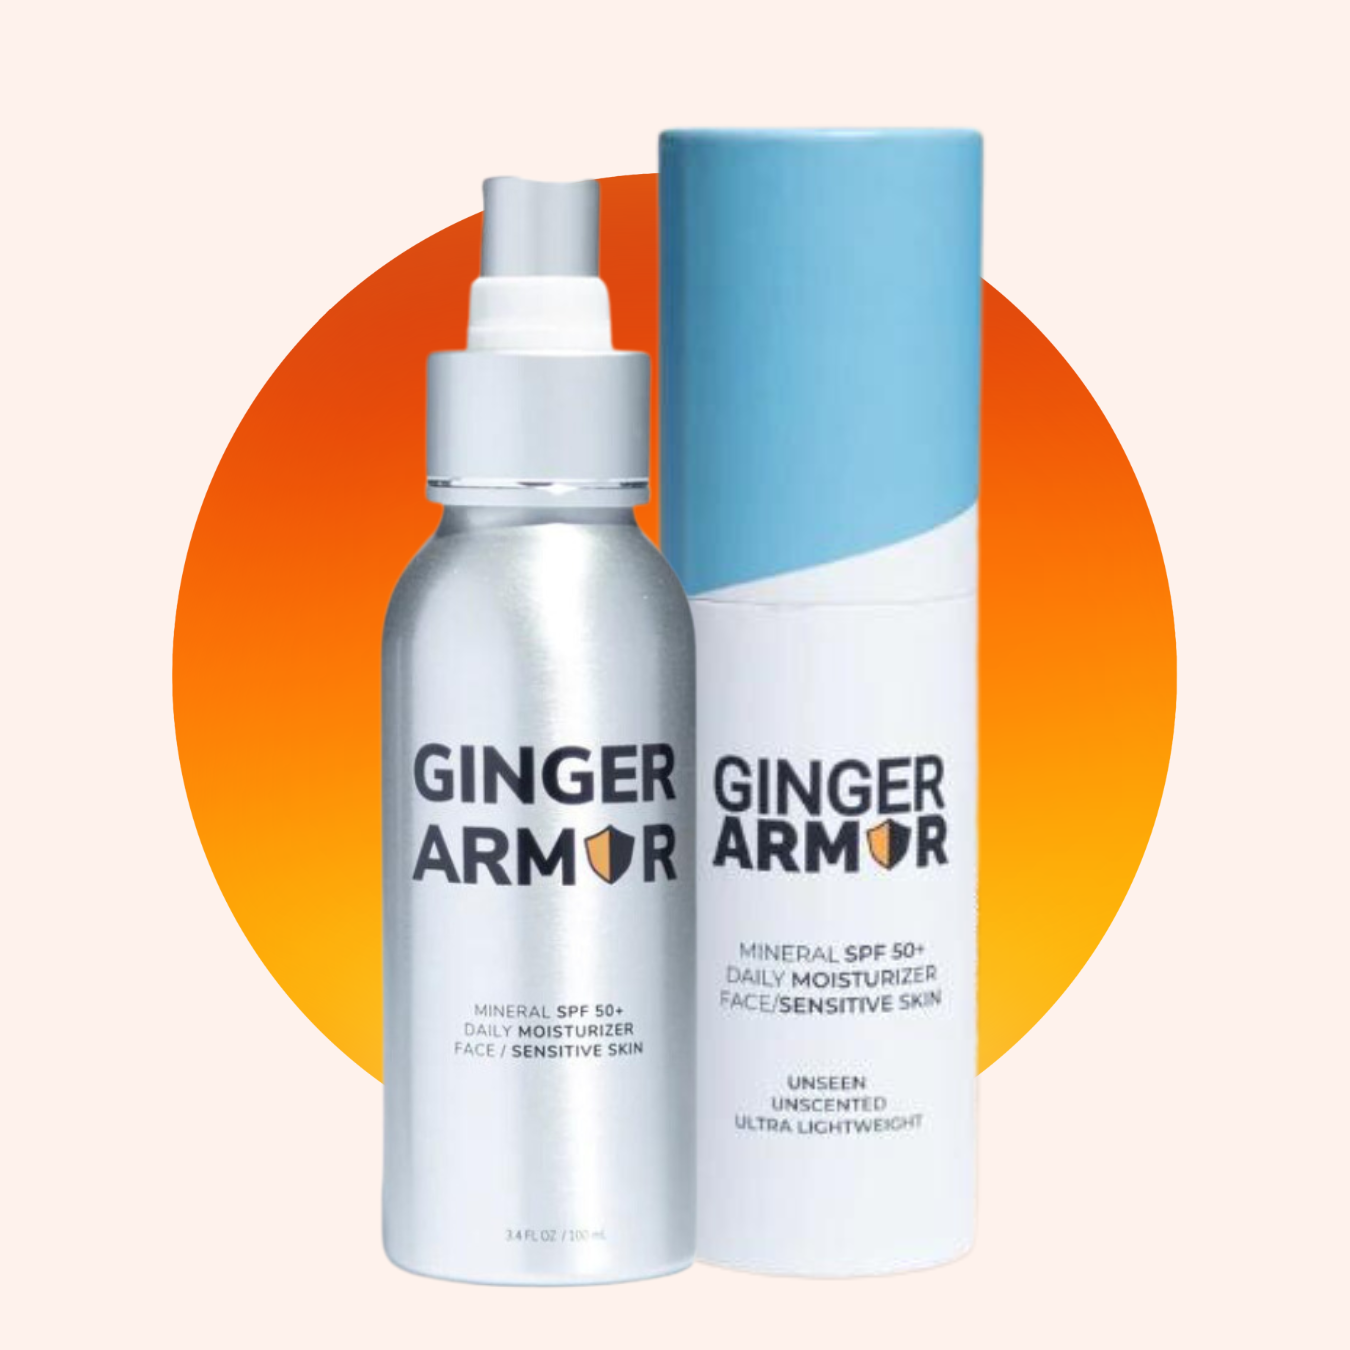 Ginger Armor SPF 50+ sunscreen and daily moisturizer set. 3.4 ounce bottles formulated with invisible zinc and natural plant-based ingredients. 